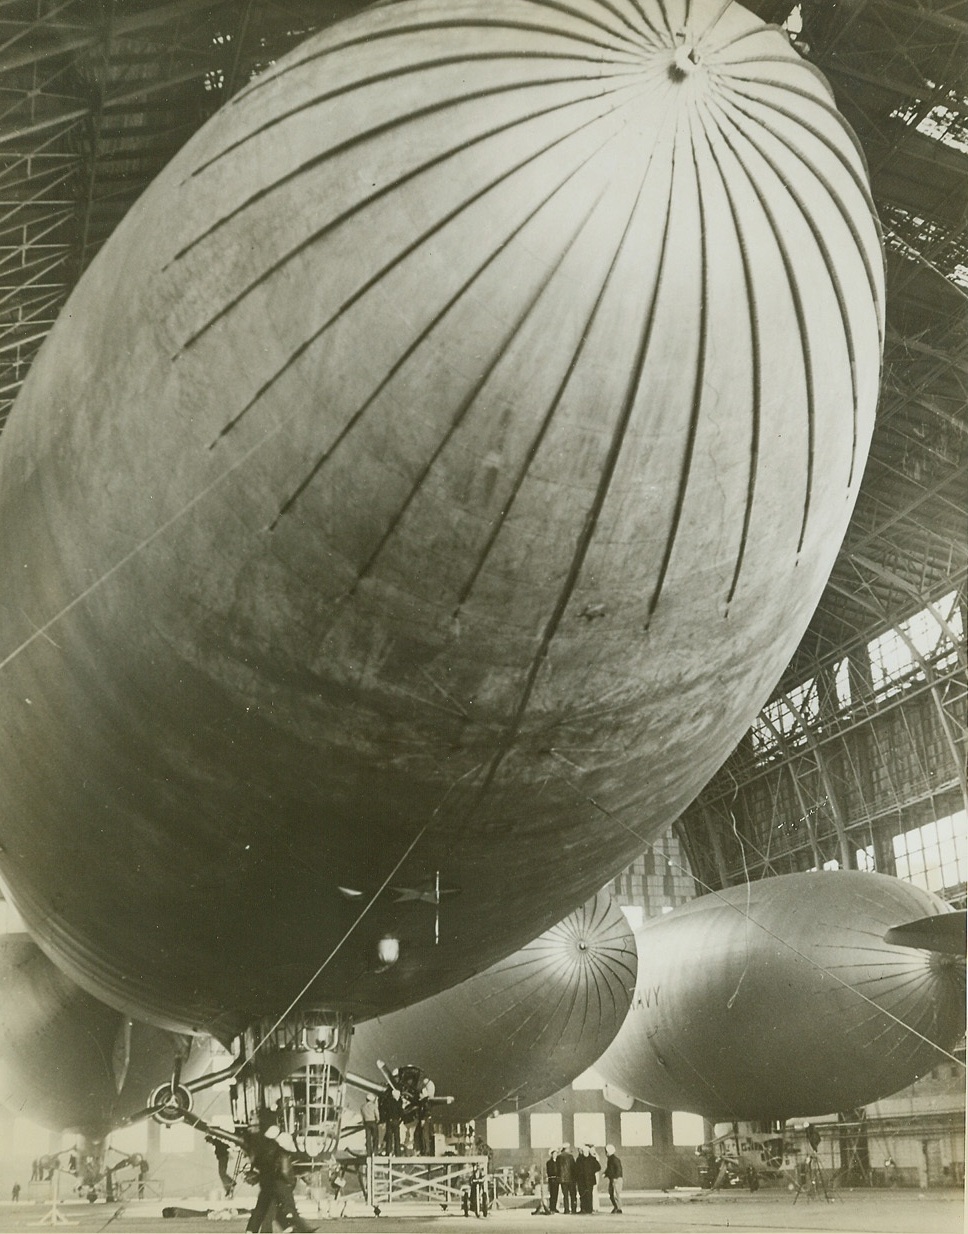 They Annoy Subs, Too, 12/30/1942. LAKEHURST, N.J. -- Nestled in their huge hangar for servicing by ground crews are four of the U.S. Navy's "K" type lighter-than-air ships. This type blimp is used for squadron duty and has played a prominent role in anti-submarine warfare off the Atlantic coast. Credit (Official Navy Photo - ACME);